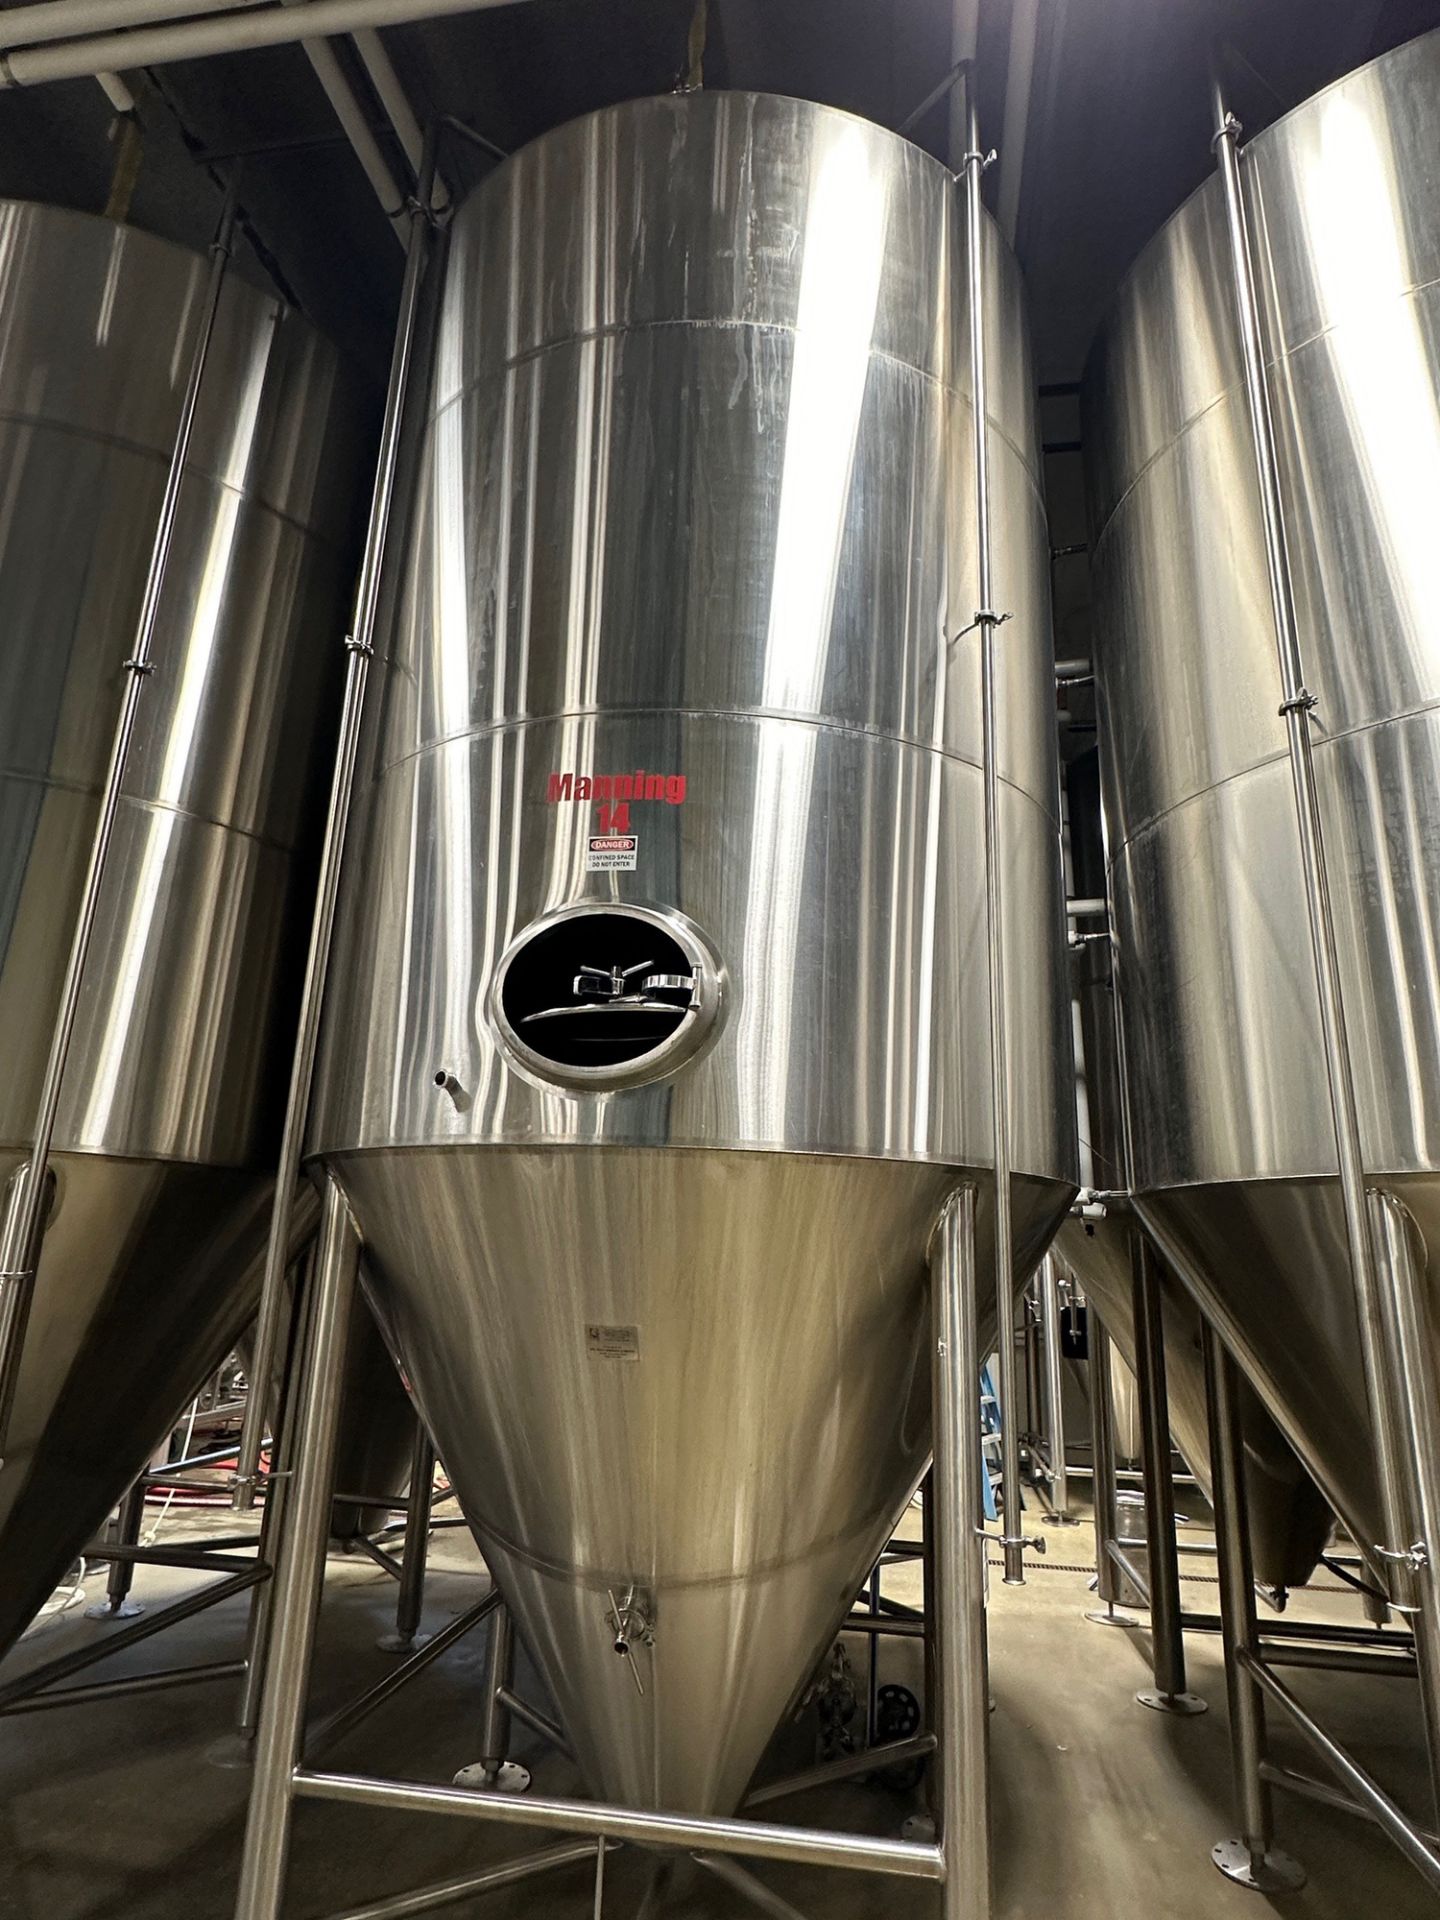 Silver State Stainless 120 BBL Stainless Steel Fermentation Tank - Cone Bottom, Gly | Rig Fee $2150 - Image 3 of 6